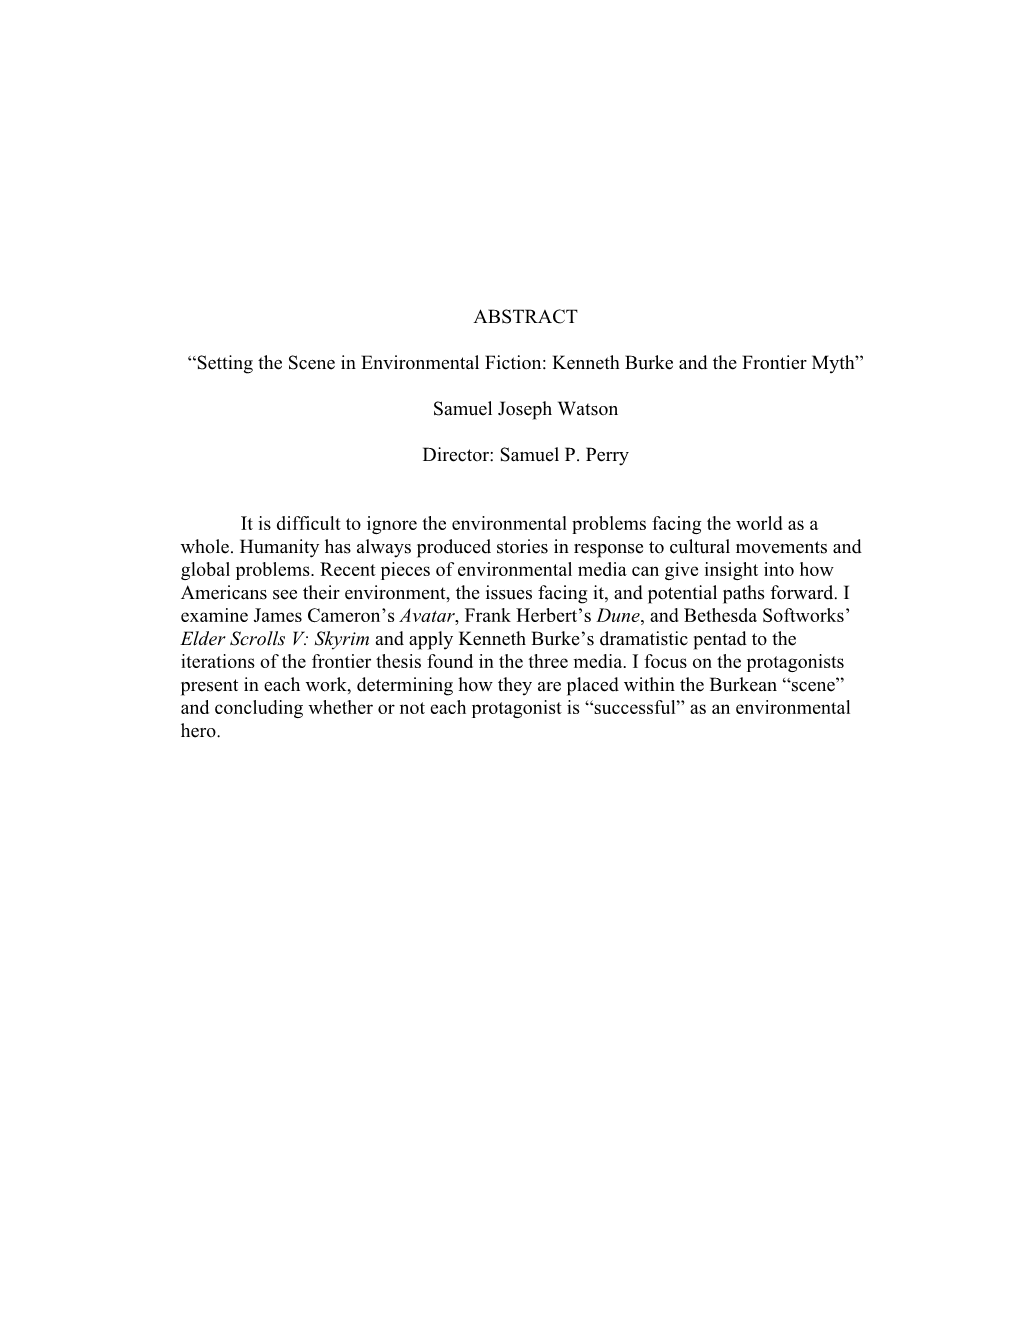 ABSTRACT “Setting the Scene in Environmental Fiction: Kenneth